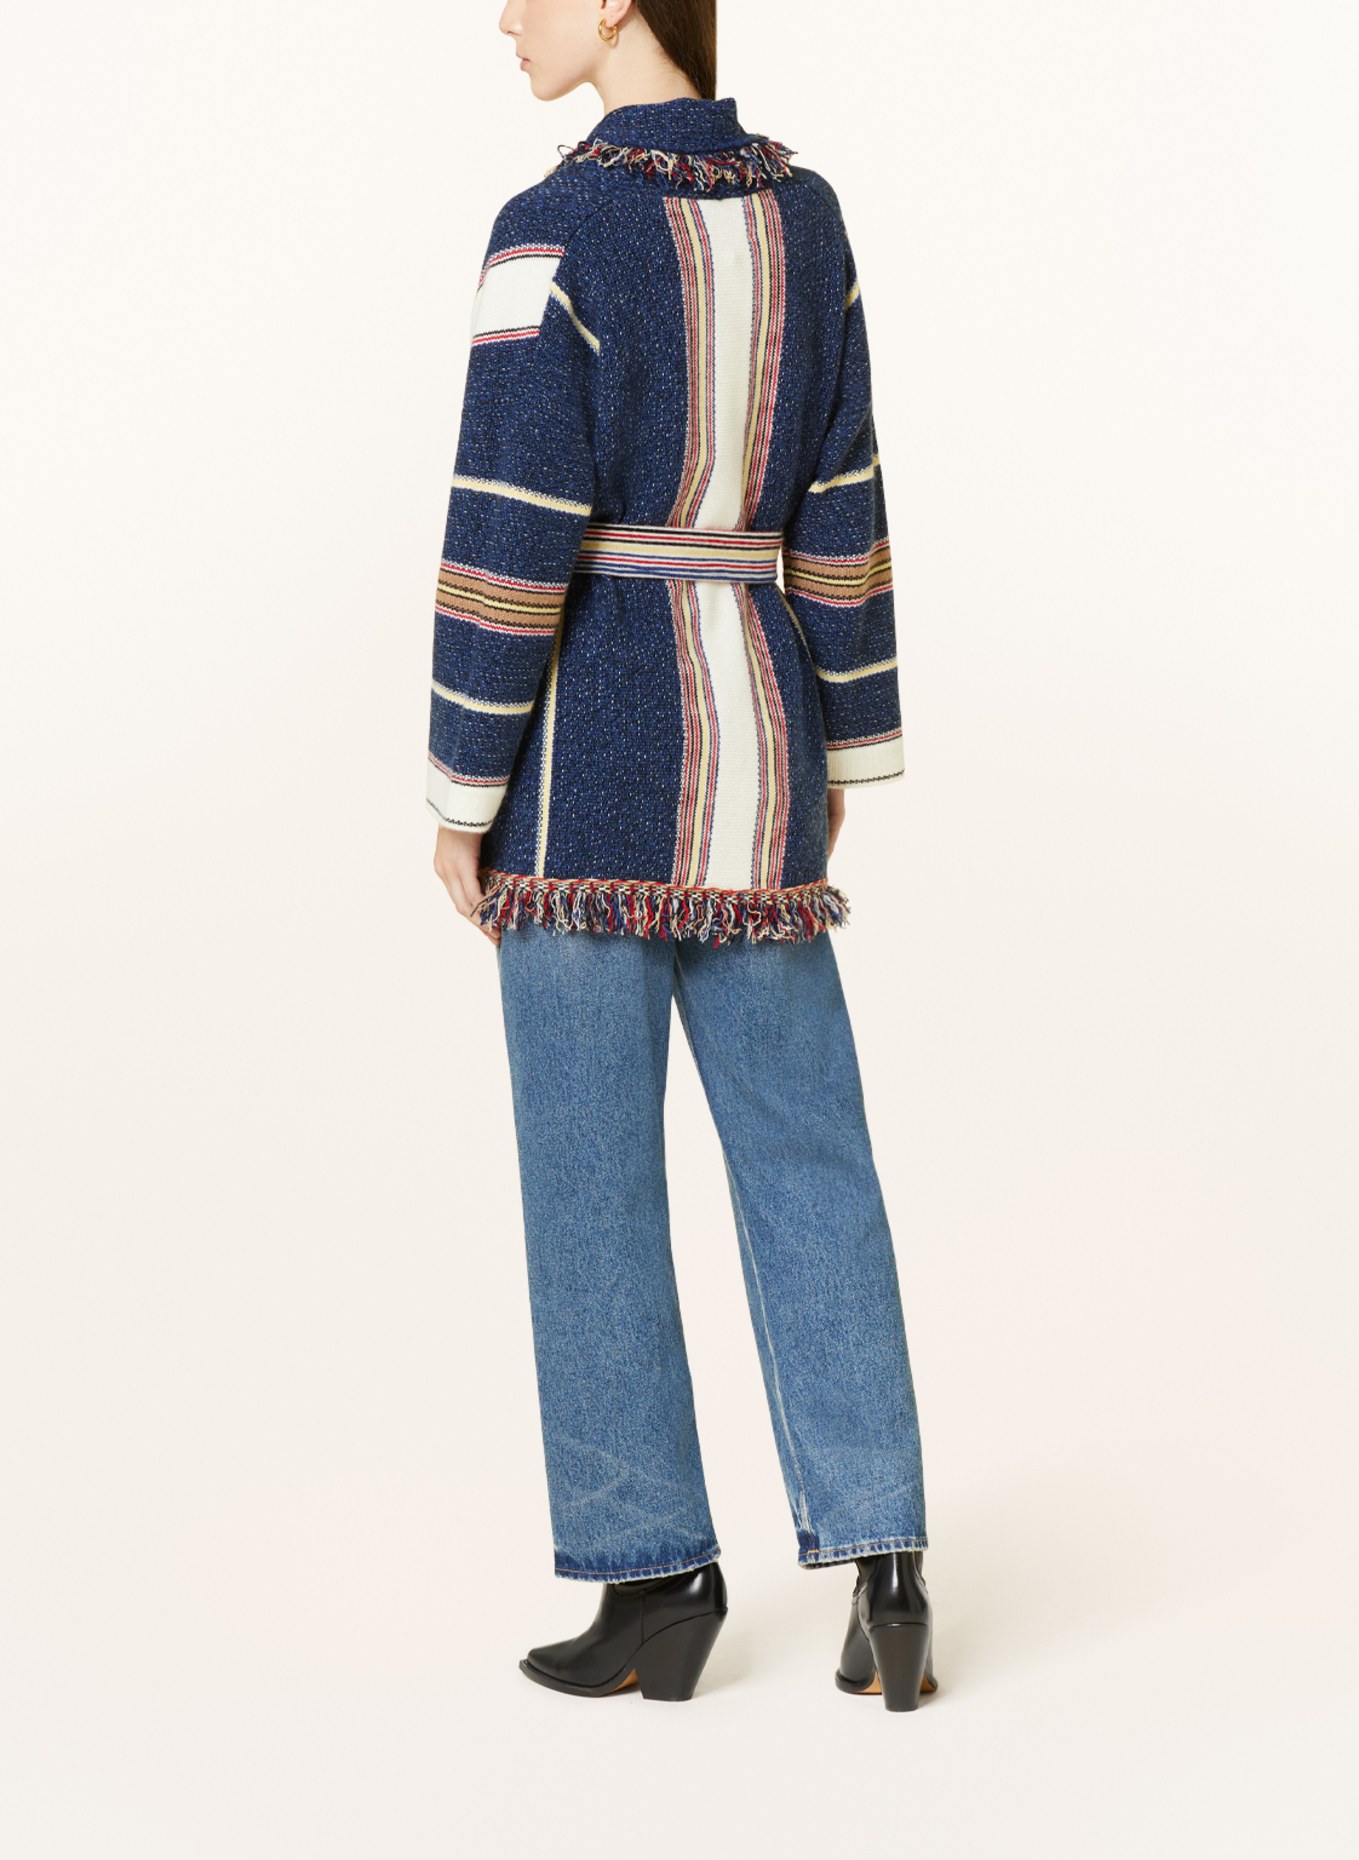 KUJTEN Knit cardigan MARIELLA in cashmere, Color: BLUE/ WHITE/ RED (Image 3)